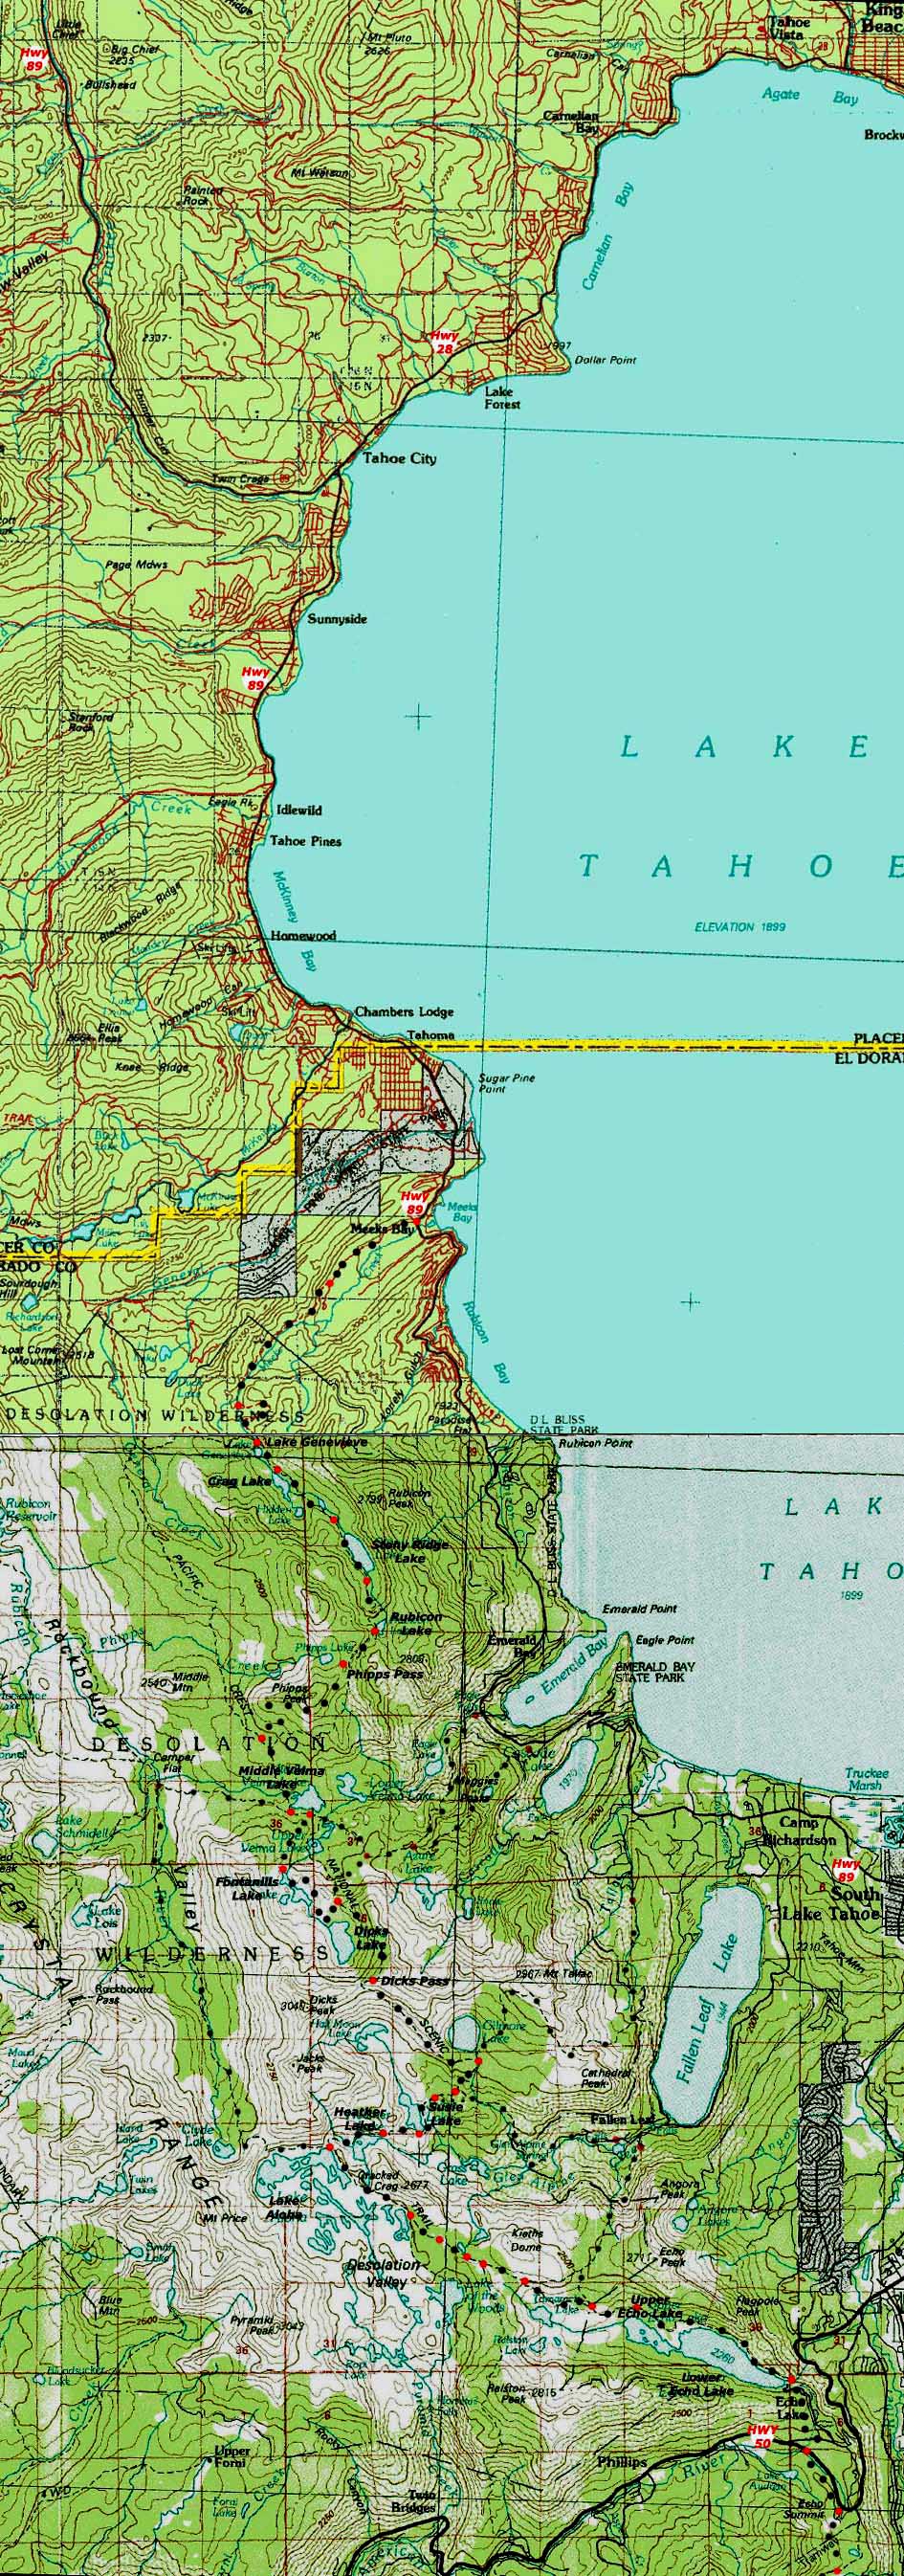 Lake Tahoecustom USGS Topo Backpacking Map featuring the Tahoe to Yosemite and Pacific Crest Trails through Desolation Wilderness.